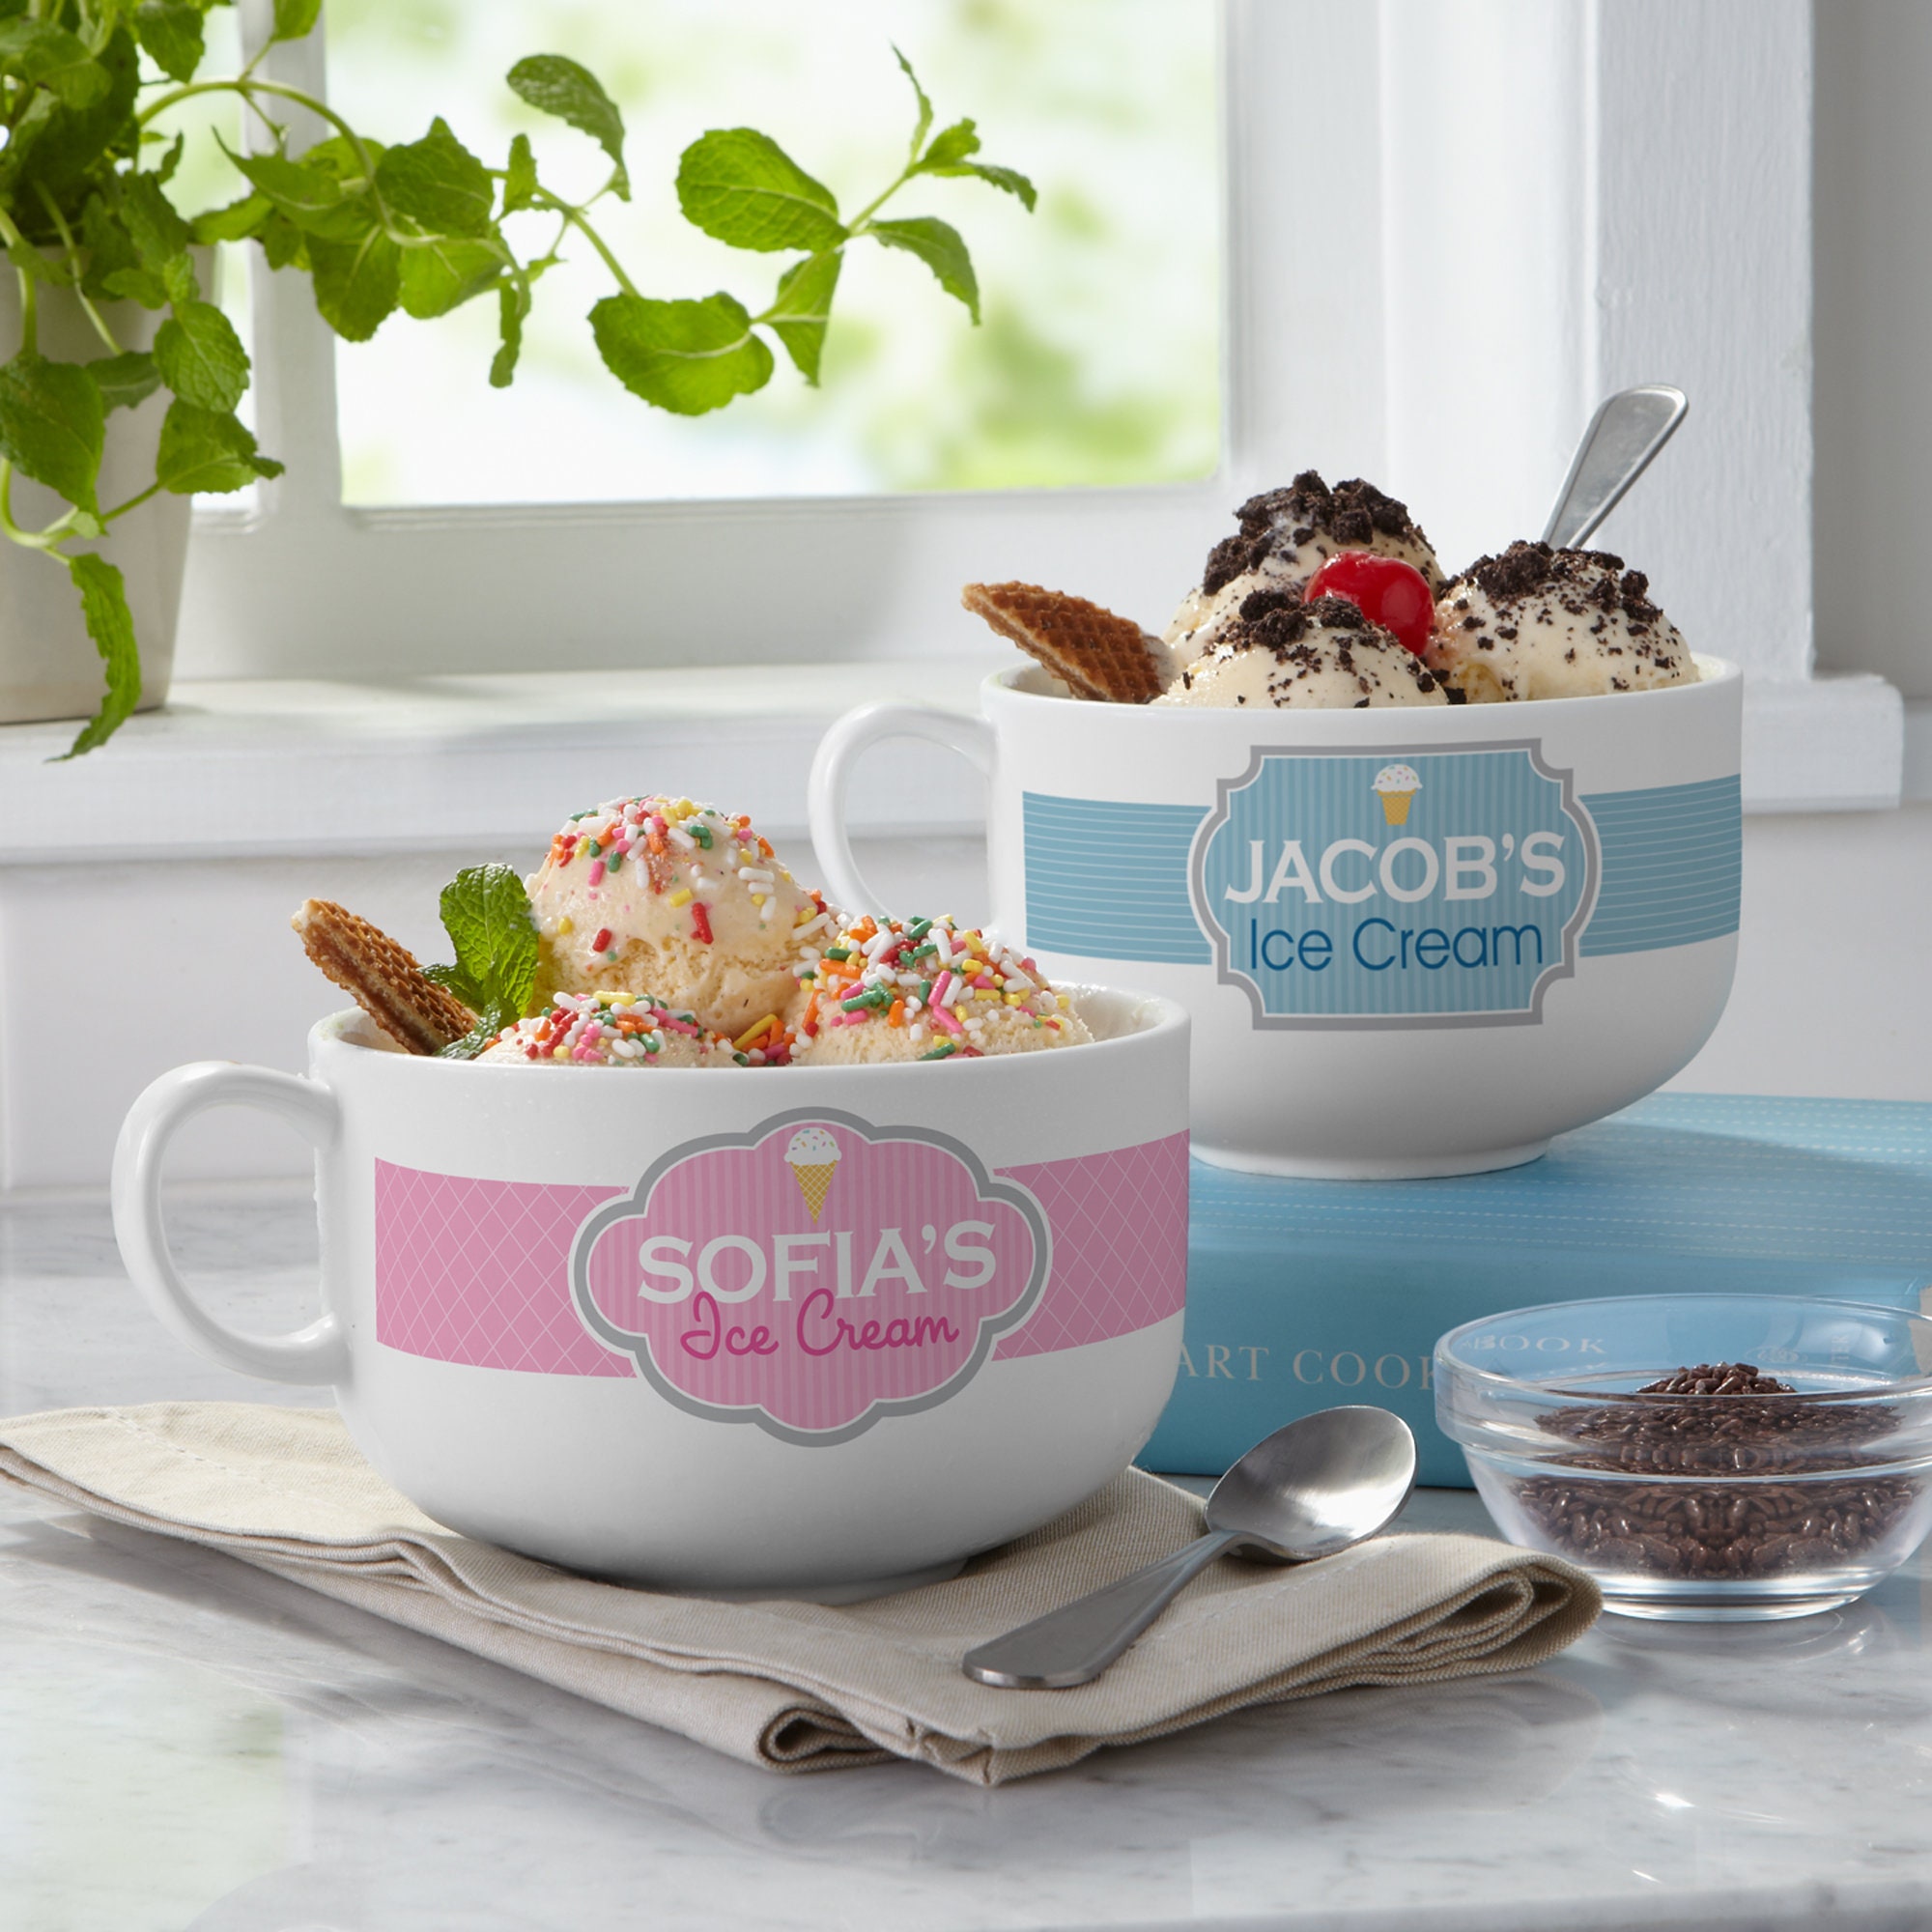 Large 32 ounce 5.5 Inch diameter Personalized bowl, Large Personalized Mug,  Personalized Ice Cream Bowl